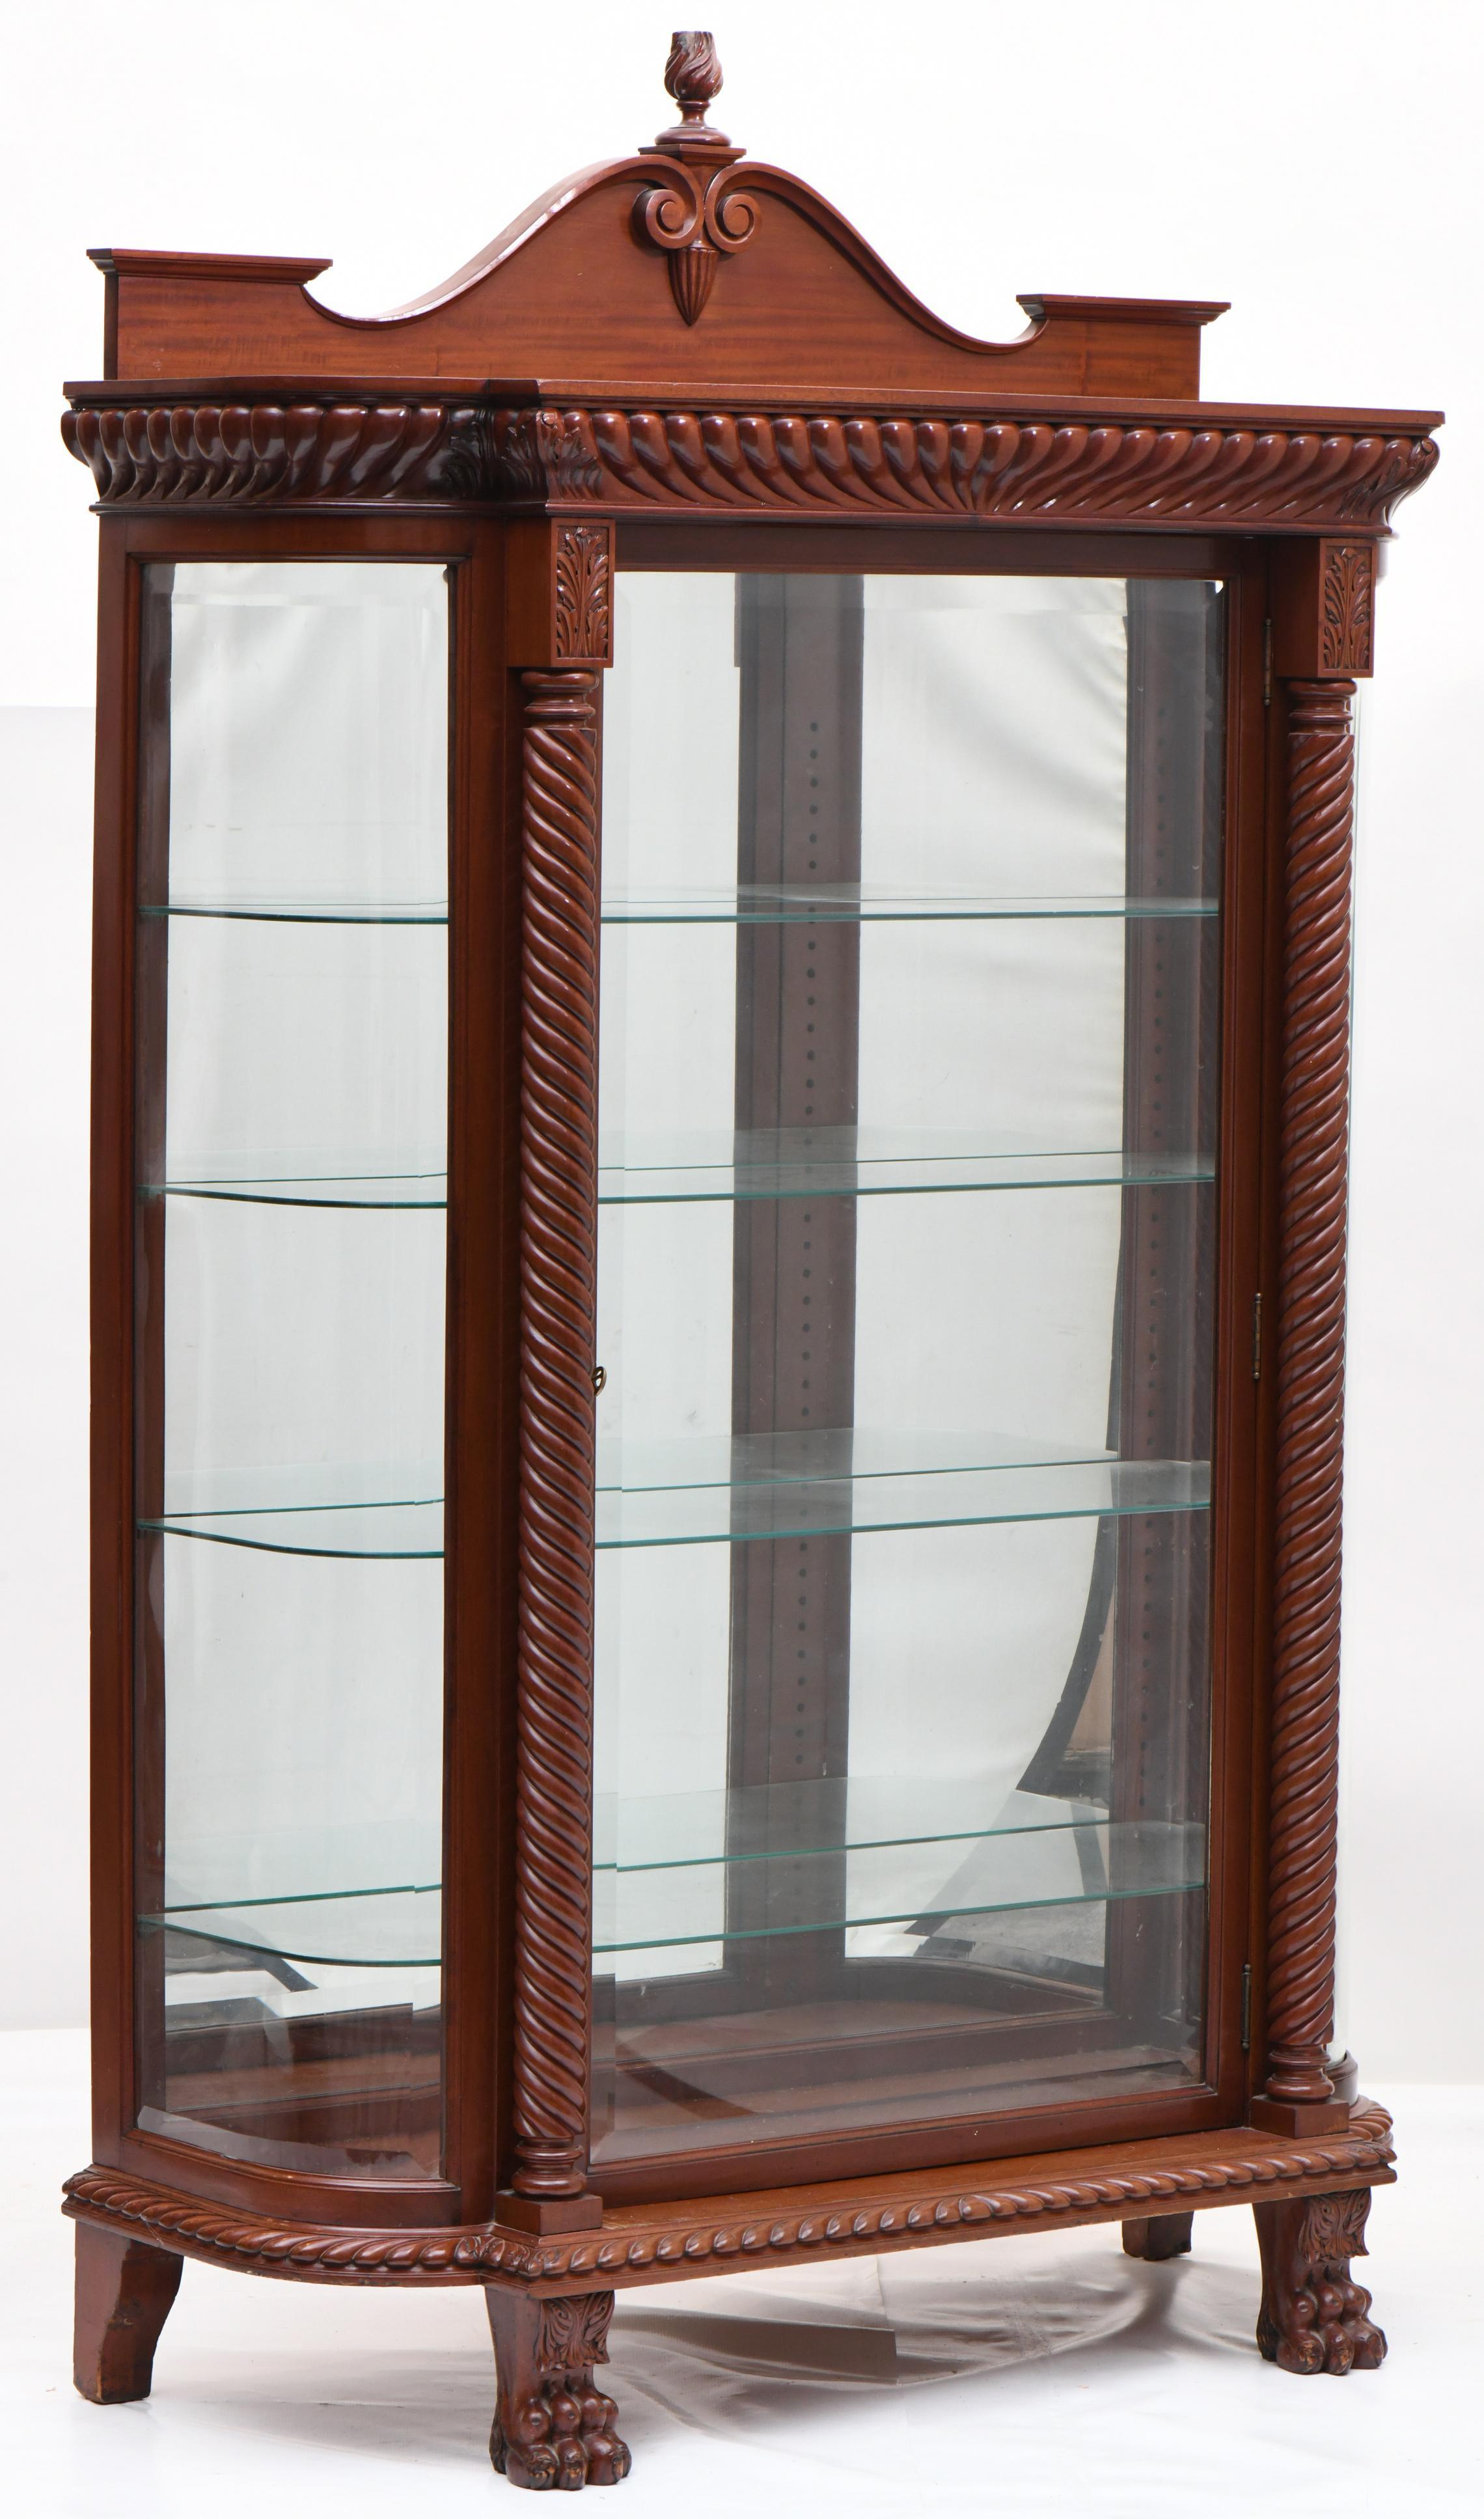 Mahogany Wood Beveled Glass Mirrored Back Cabinet / Vitrine By R.J.Horner For Sale 3